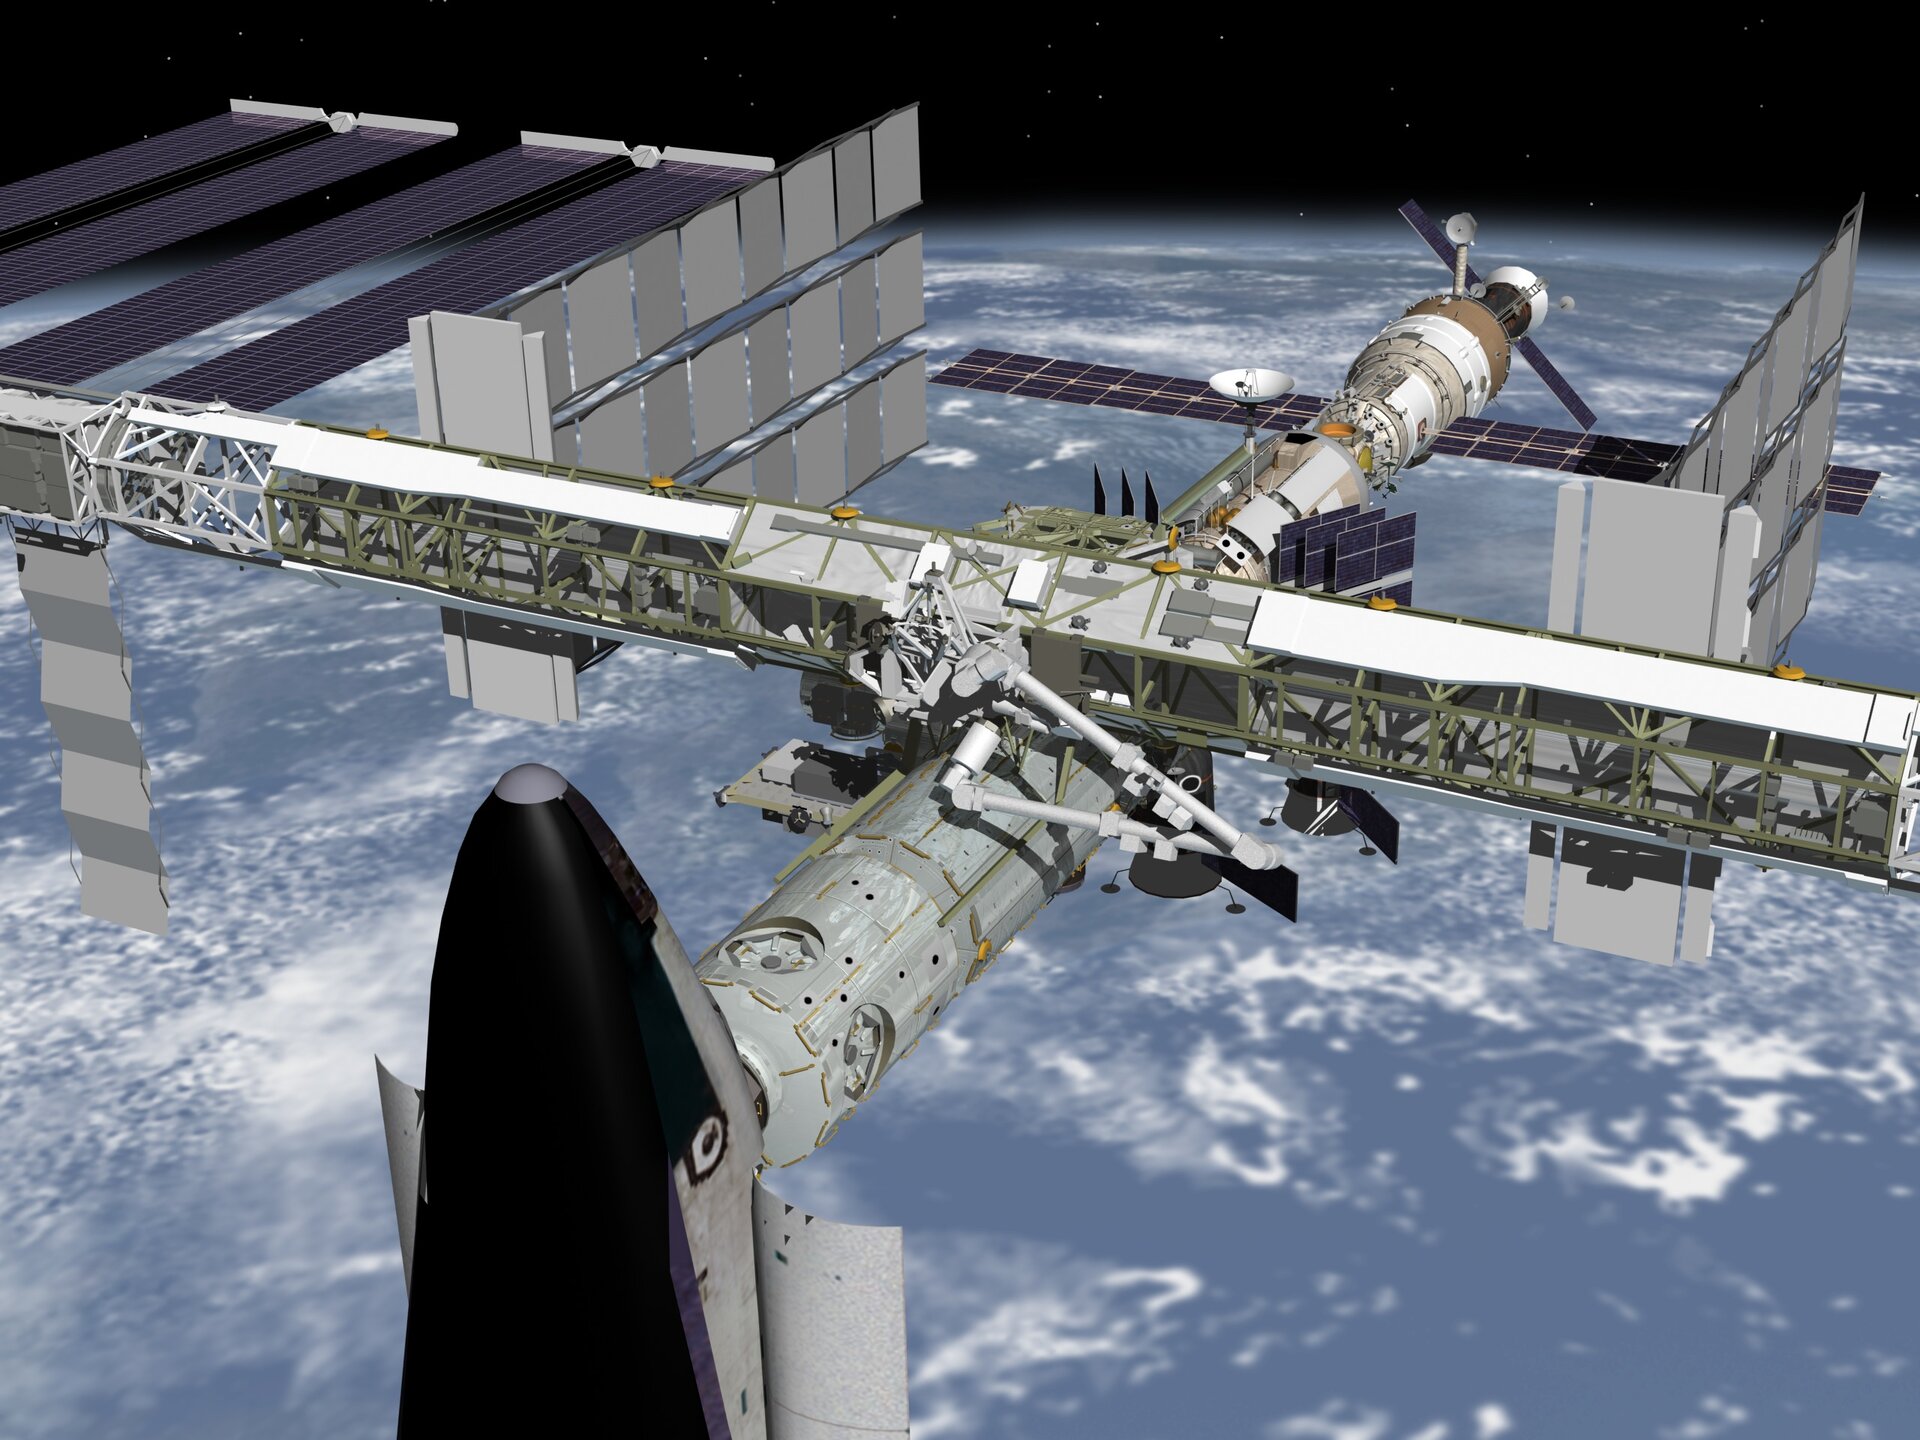 Post STS-120 mission showing the Space Shuttle docked to Node 2